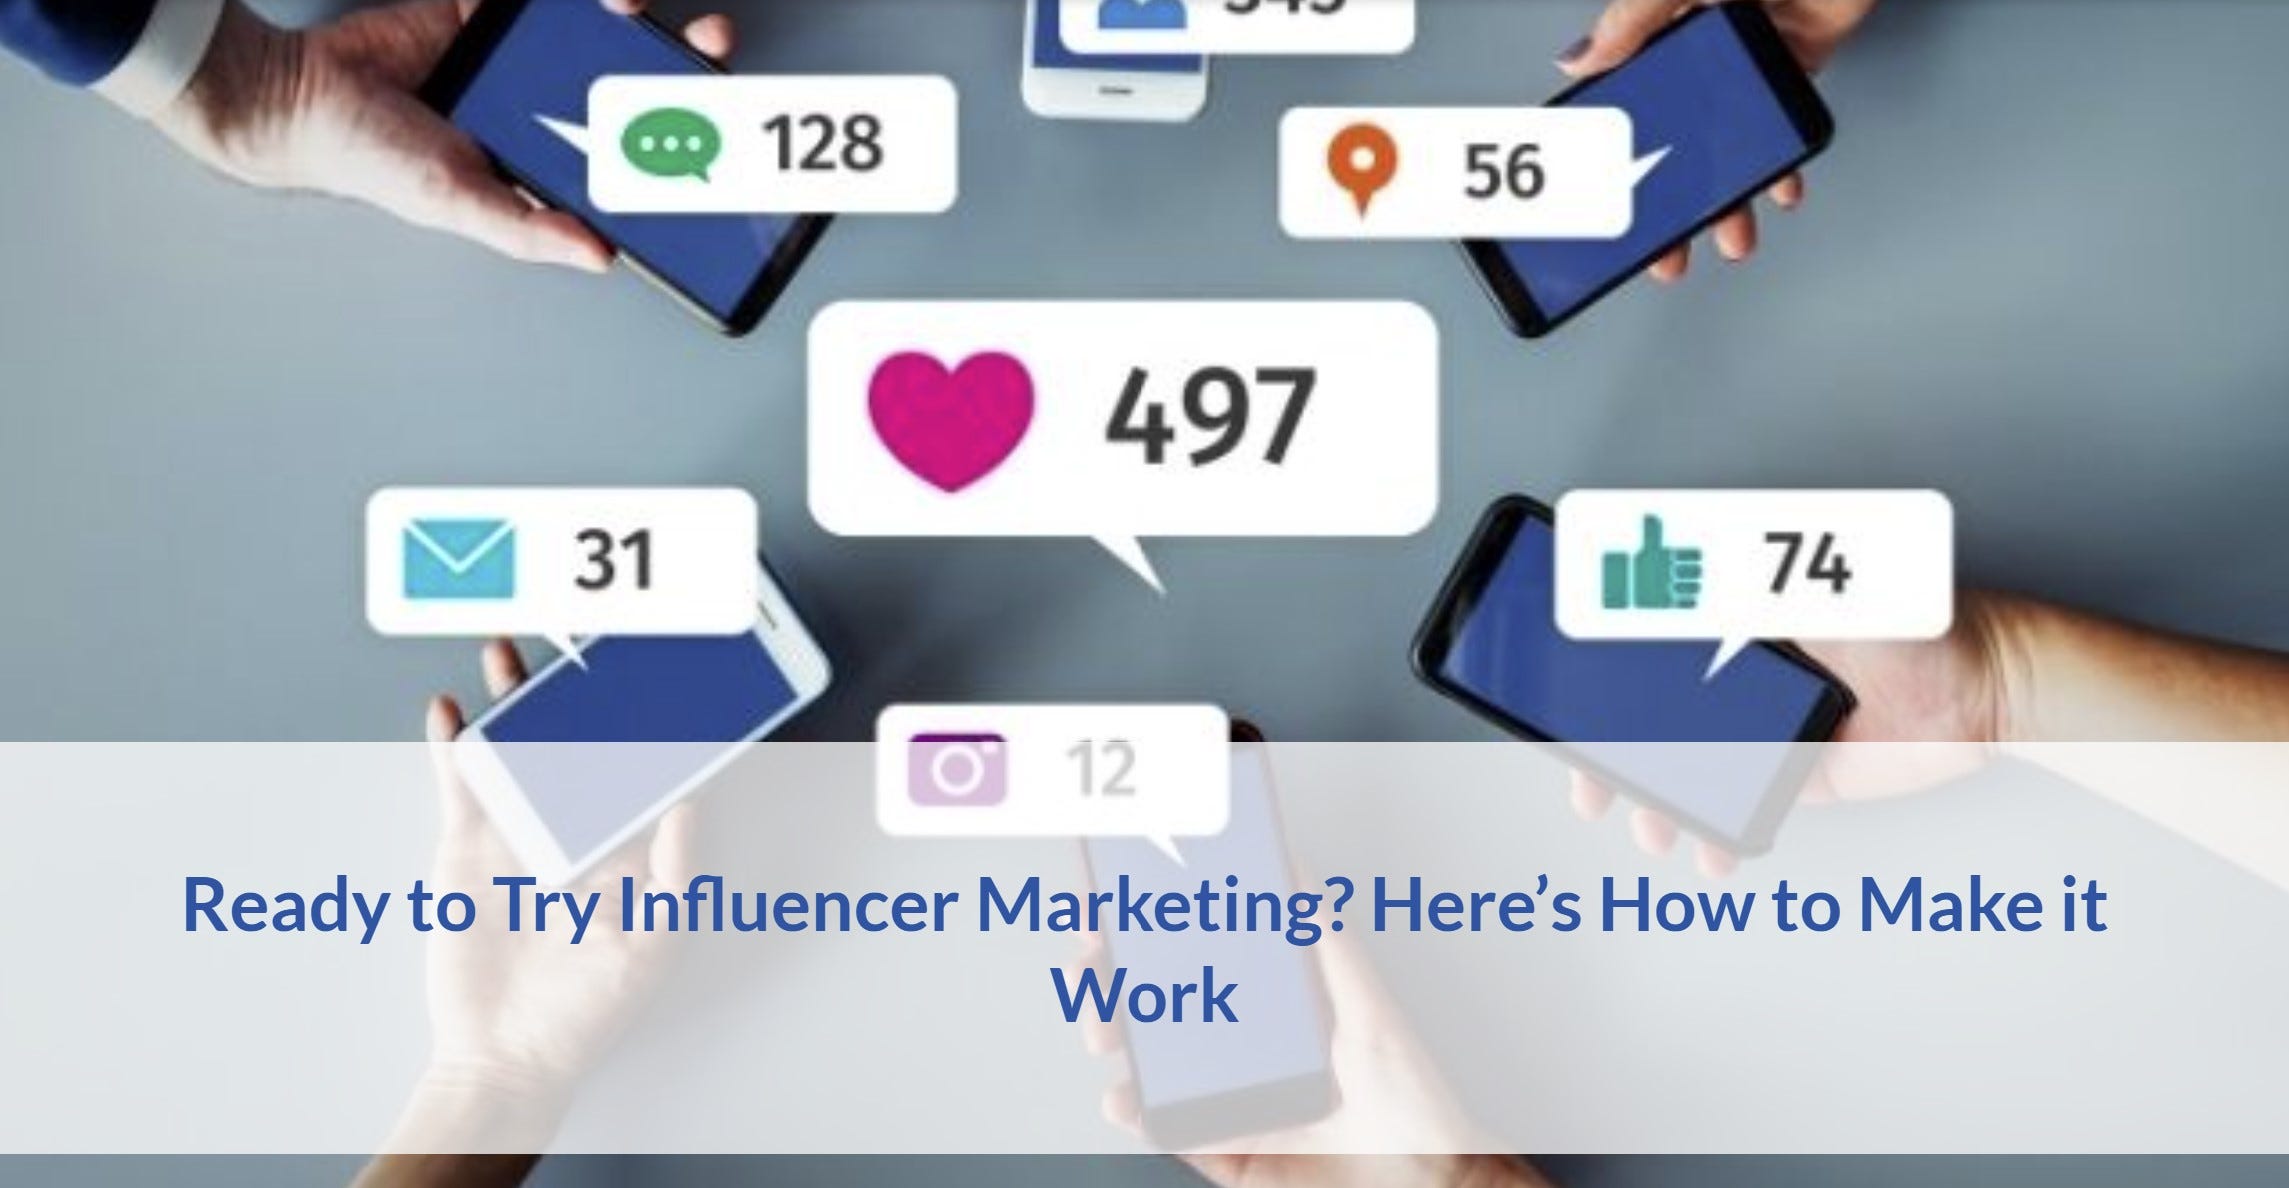 Ready to Try Influencer Marketing? Here’s How to Make it Work